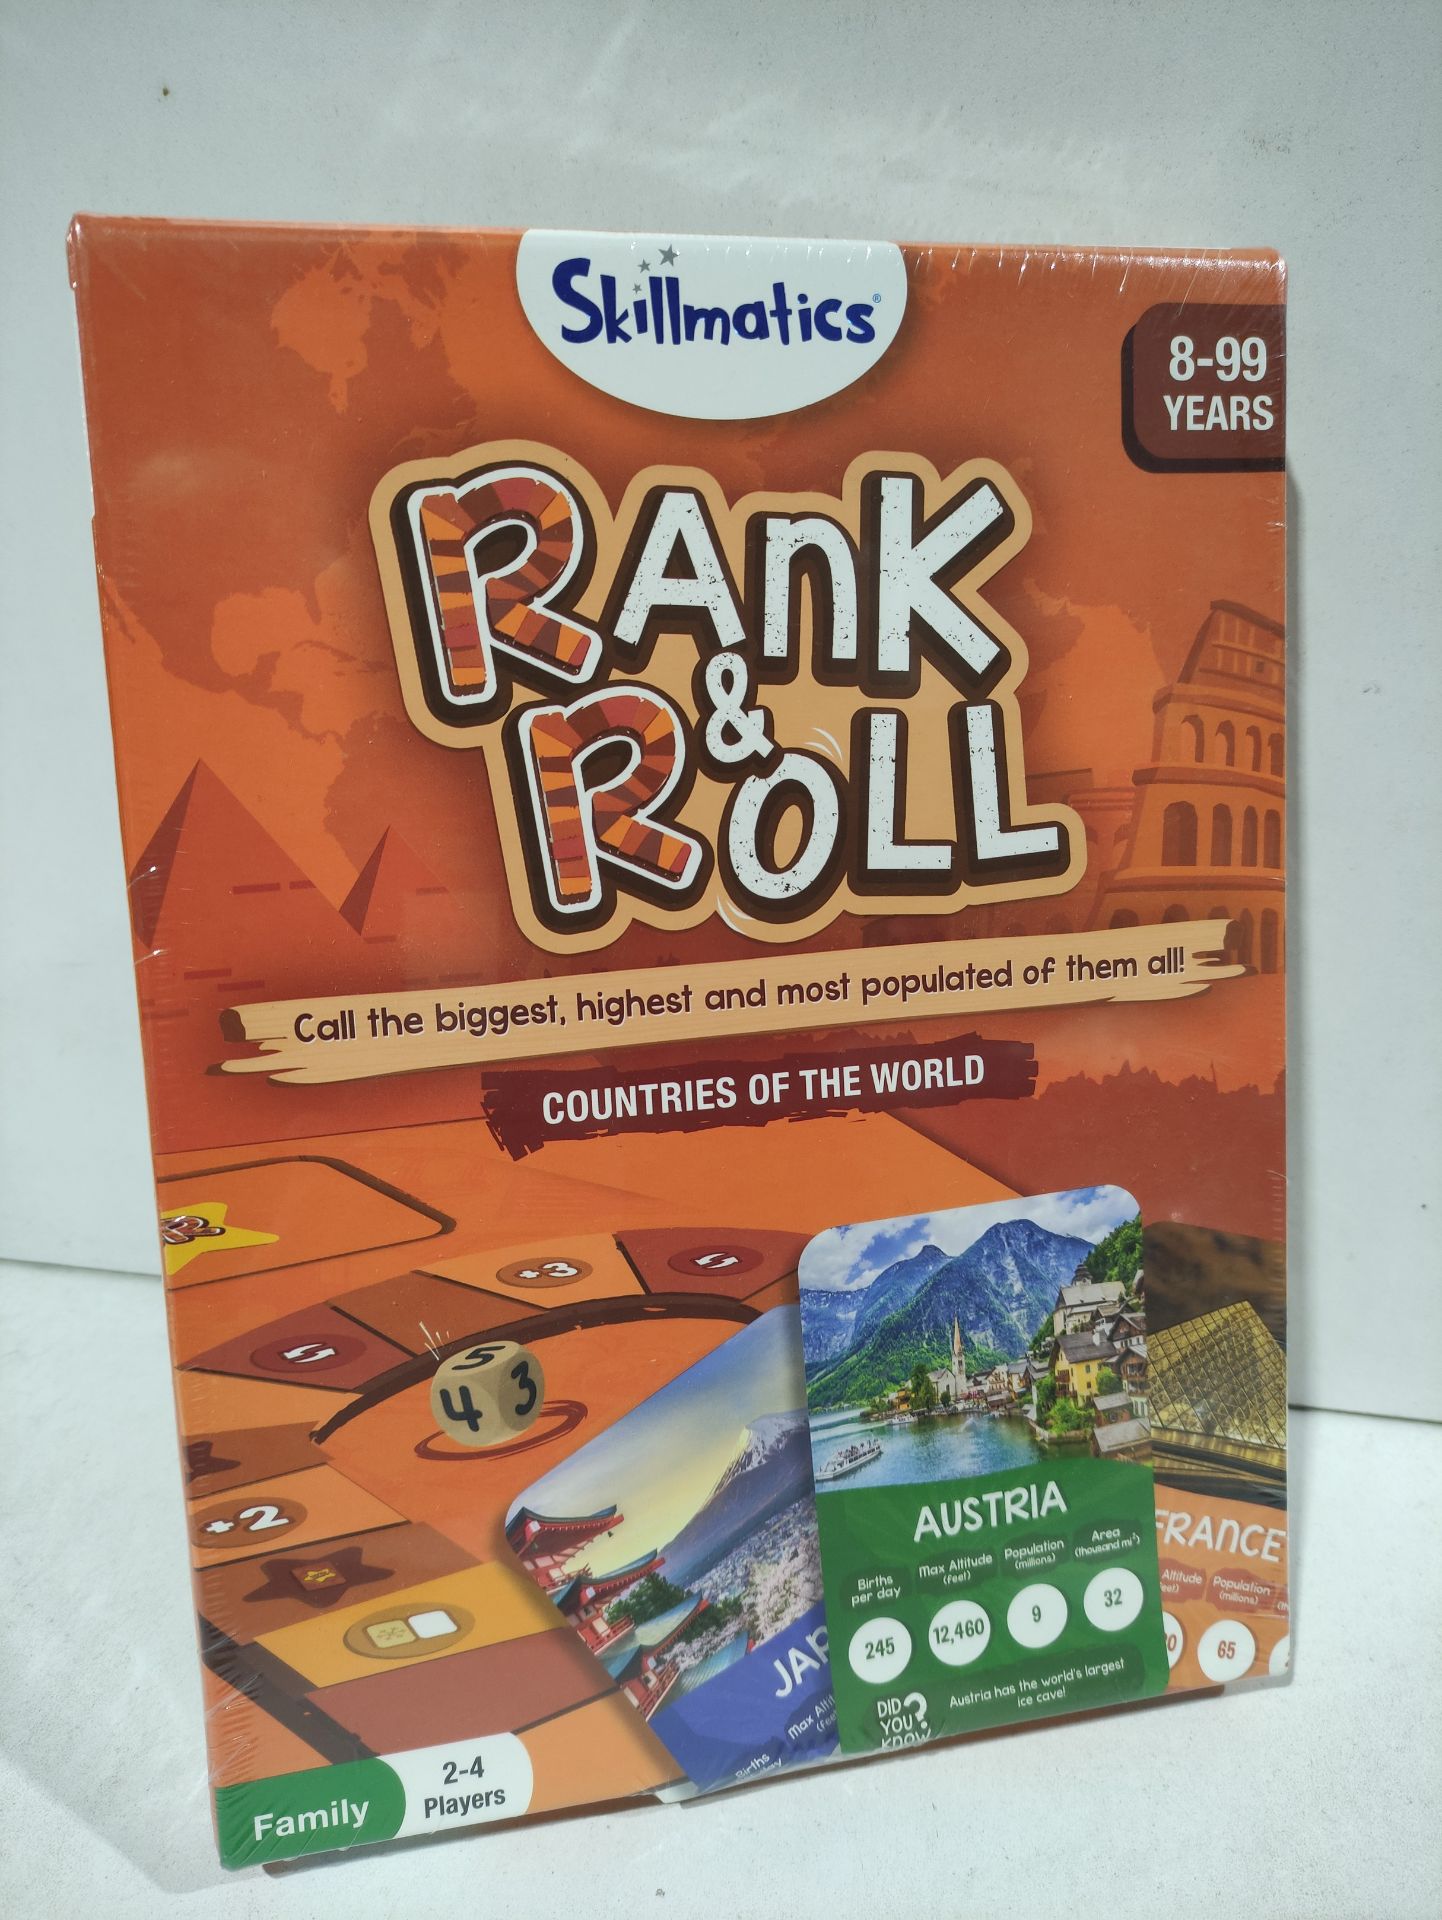 RRP £24.55 BRAND NEW STOCK Skillmatics Trump Card & Board Game - Rank & Roll Countries of The World - Image 2 of 2